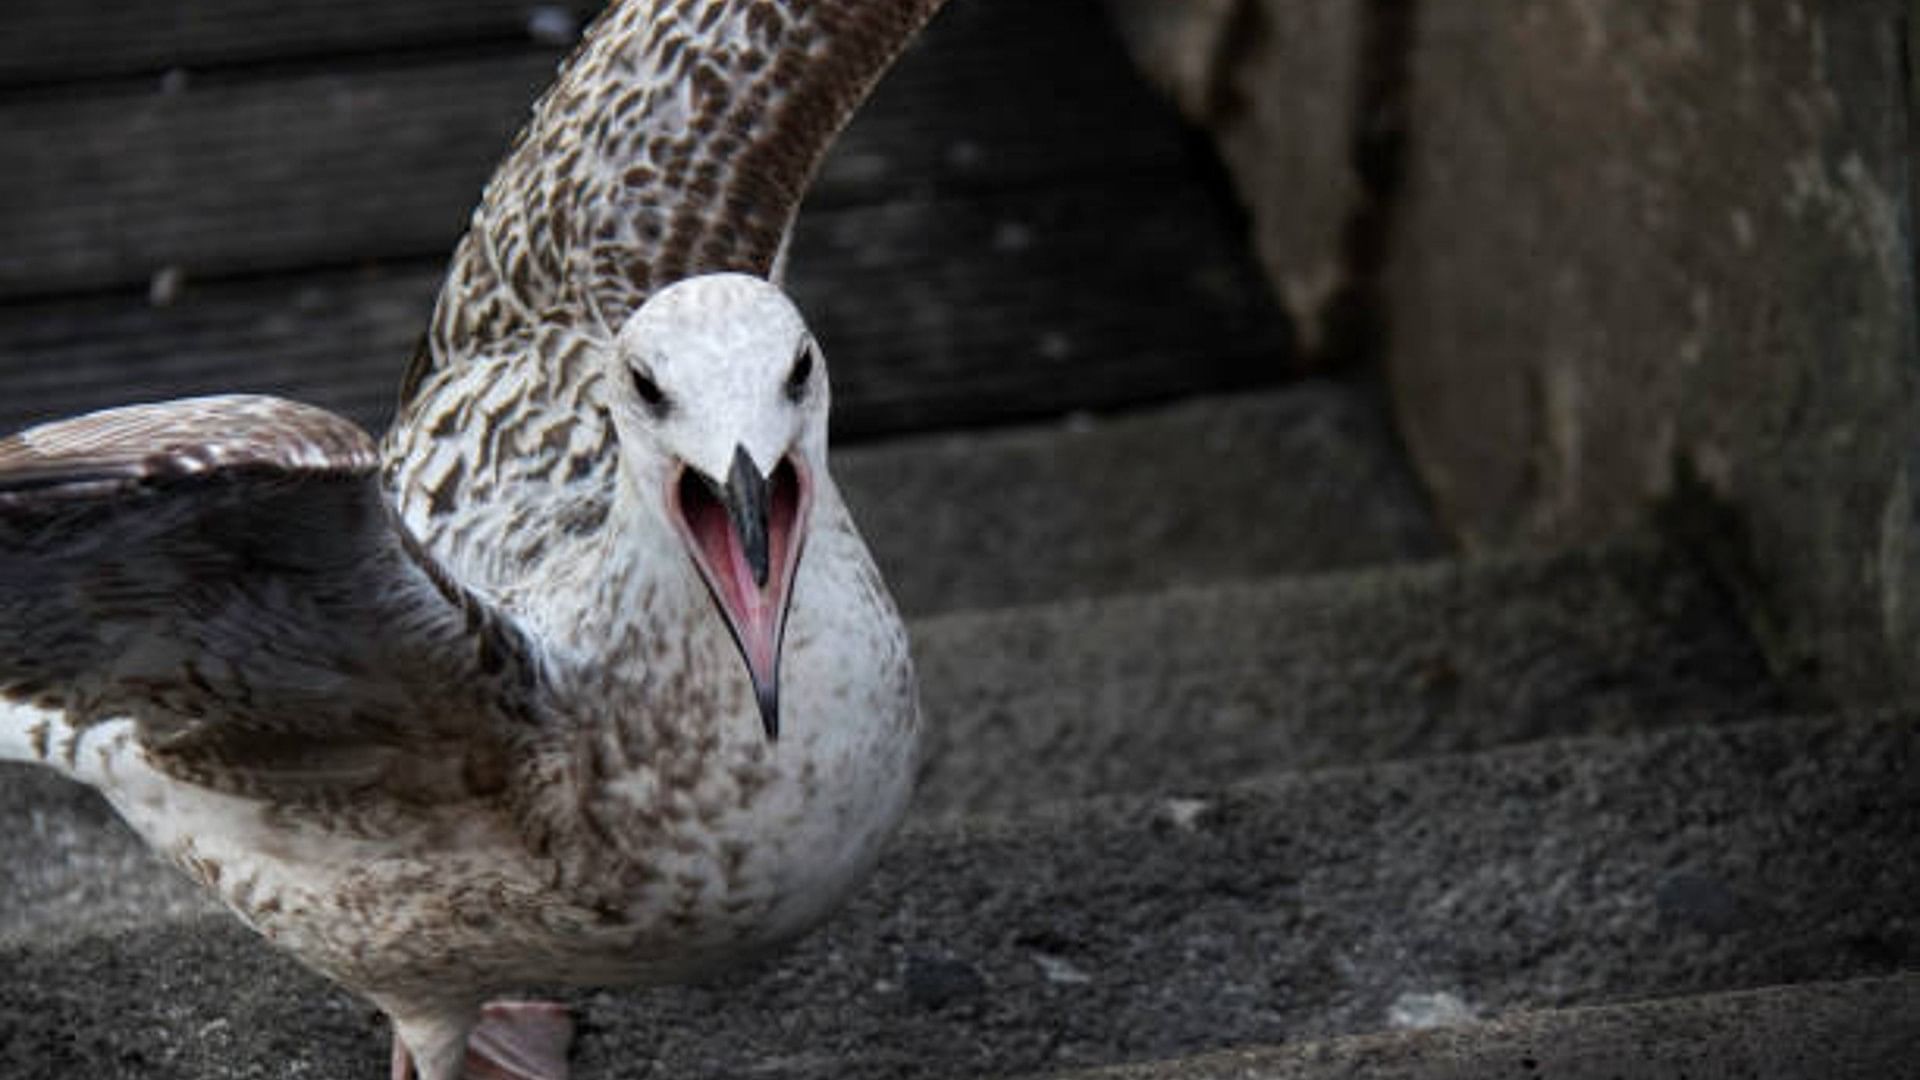 a dreaded seagull swallowed a live rabbit You will get goosebumps after watching the video